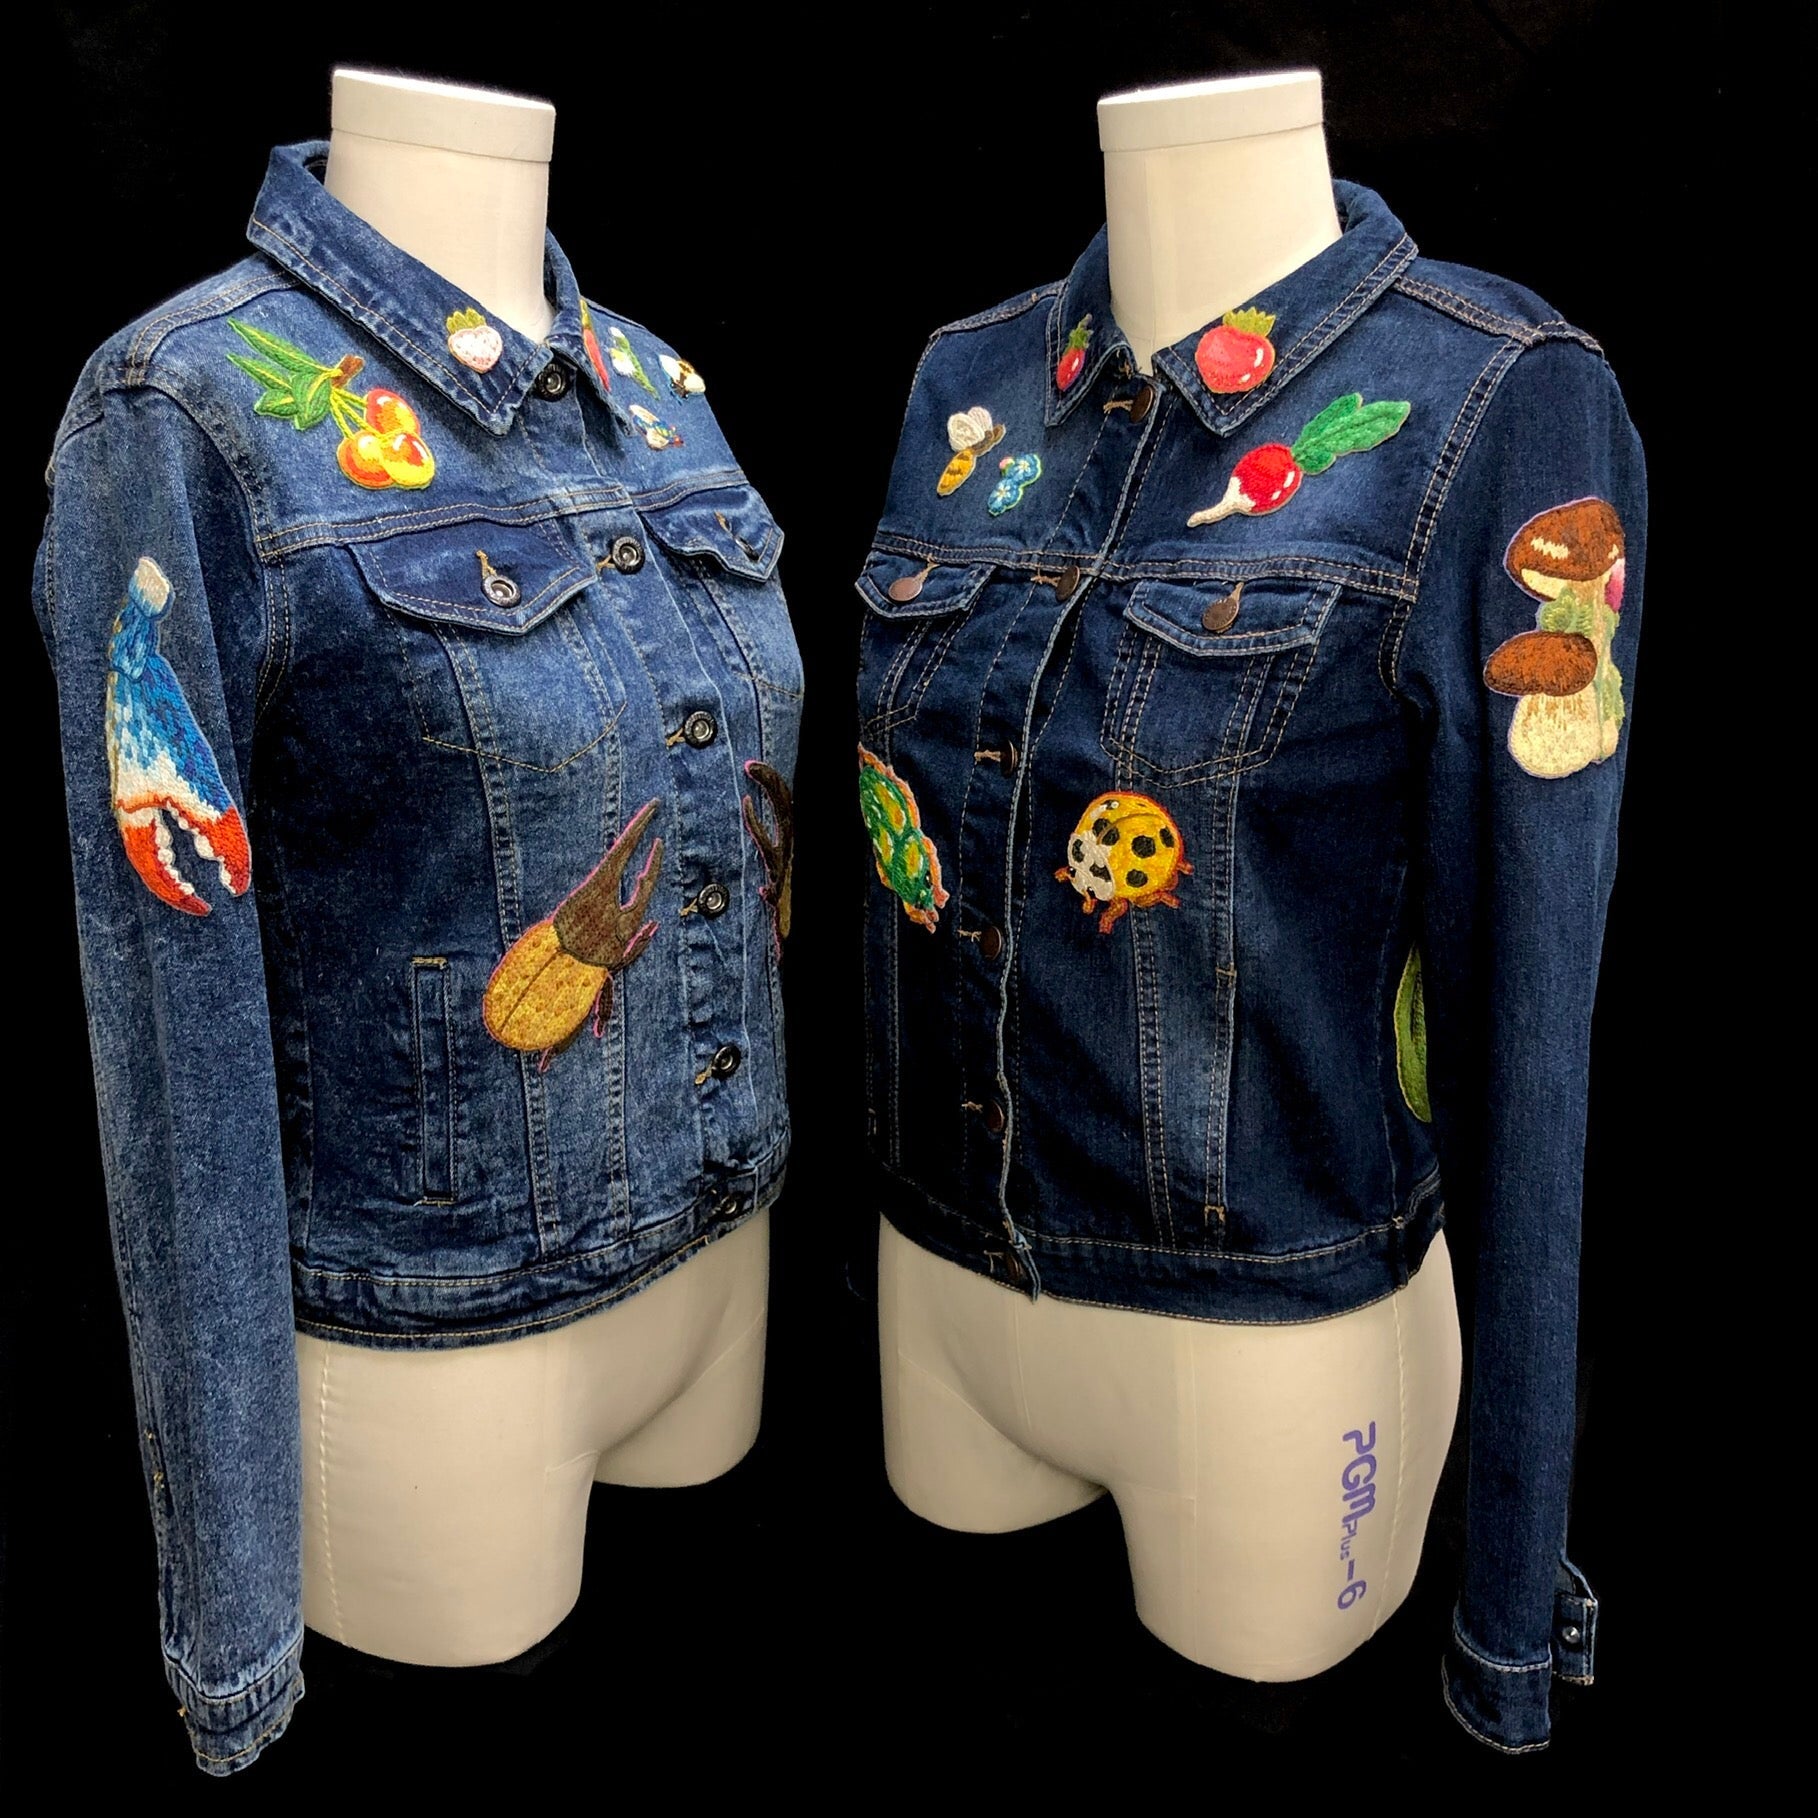 Beetle Jacket with Comet Moth Jacket to the right, the two smaller sizes available